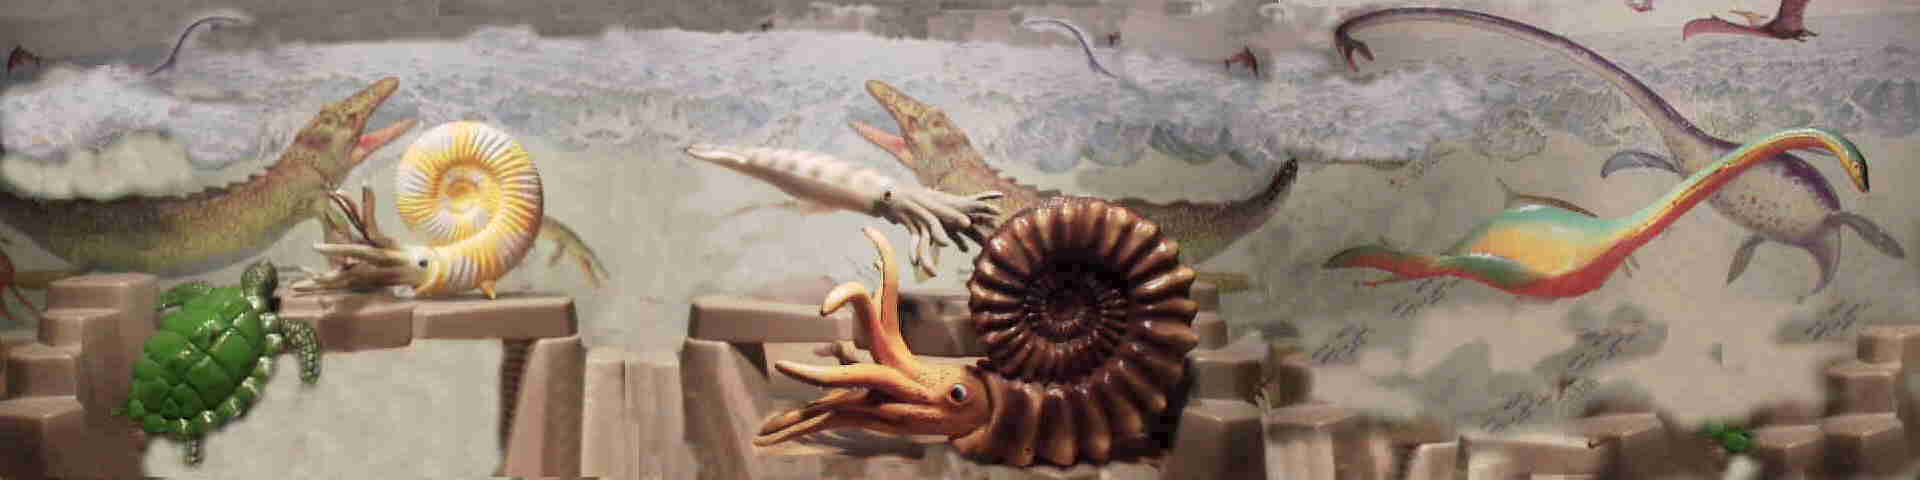 Ammonites and a Belemnite from Bullyland, and a Plesiosaurus from the Laramie play set, strongly reminiscent of the Invicta figure. 